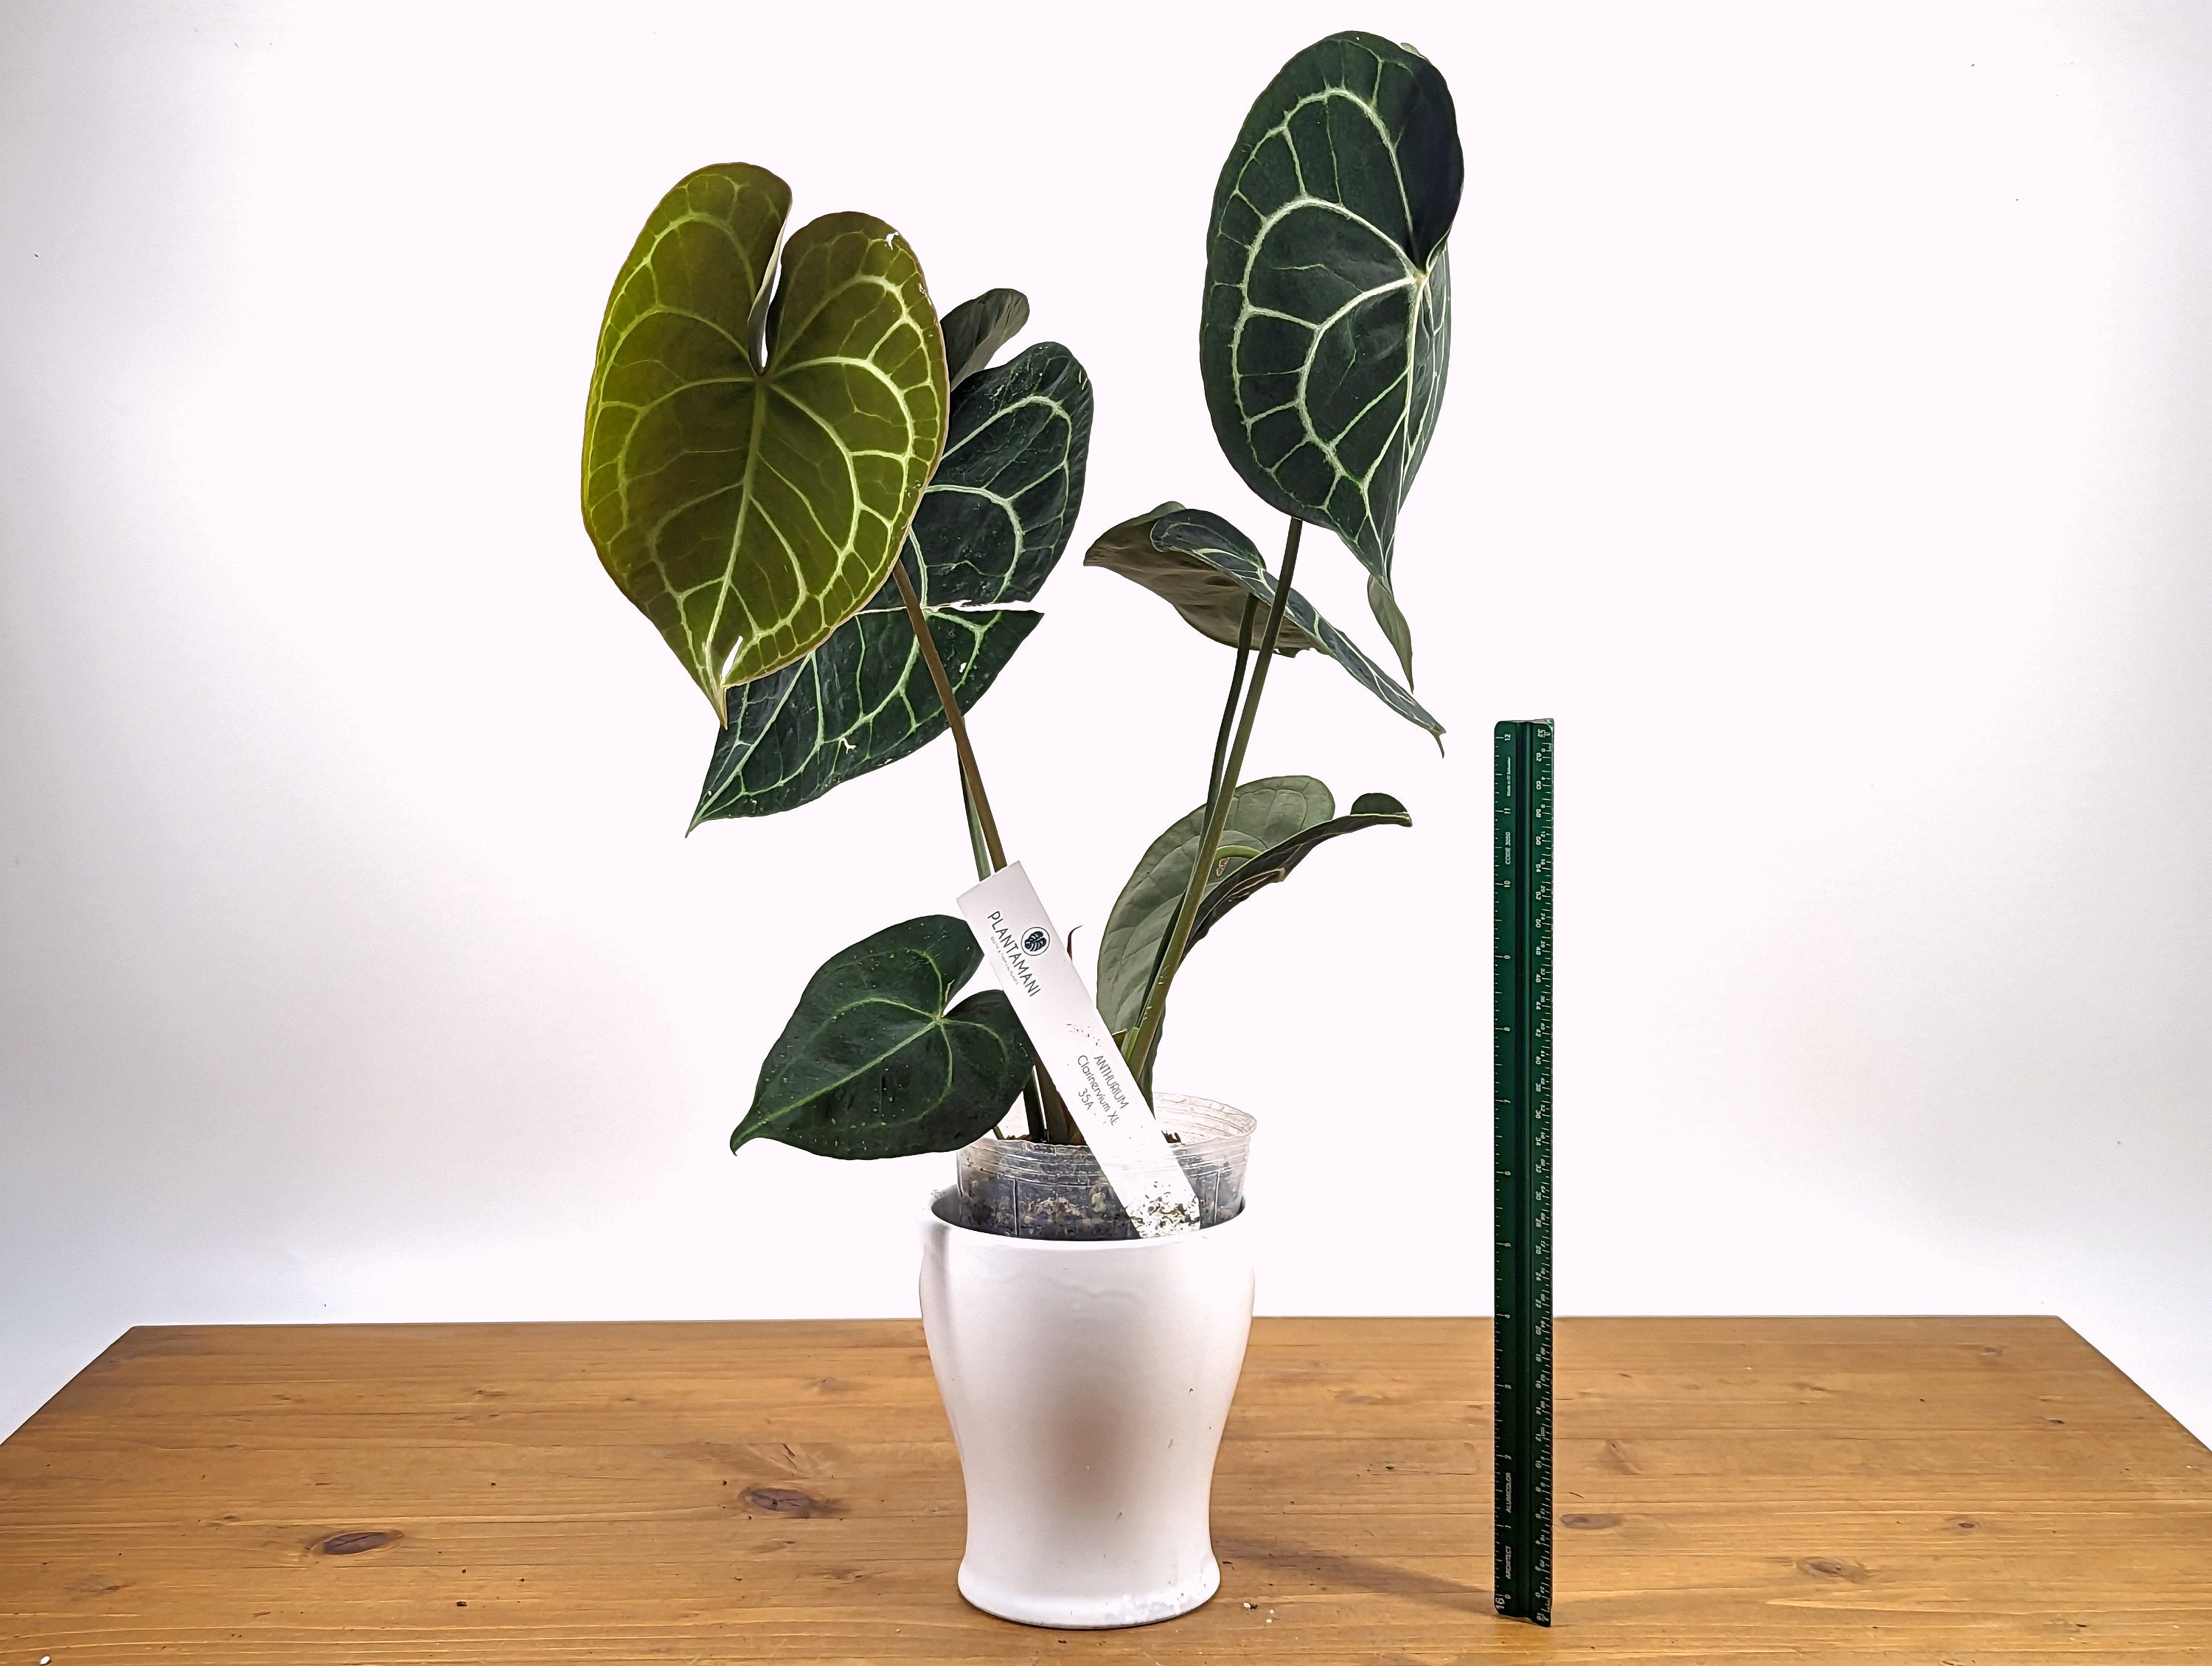 XL Clarinervium Anthurium King Over 16&quot; tall in 4 Inch Nursery Pot Live Tropical Indoor House Plant - Great Gift Idea!